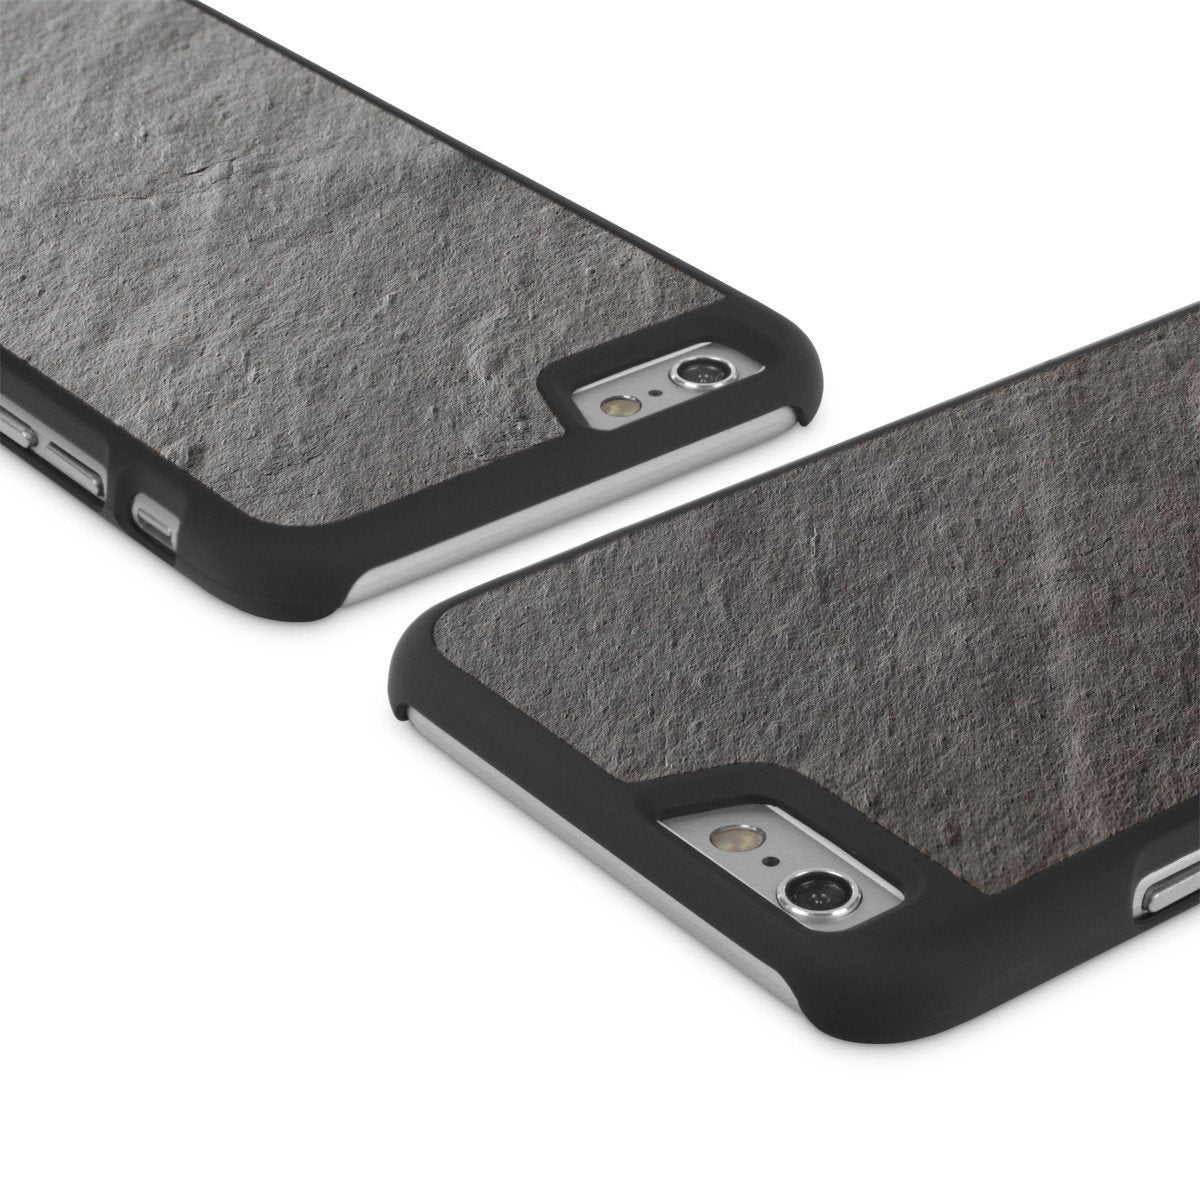  iPhone 6/6s Plus —  Stone Snap Case - Cover-Up - 5